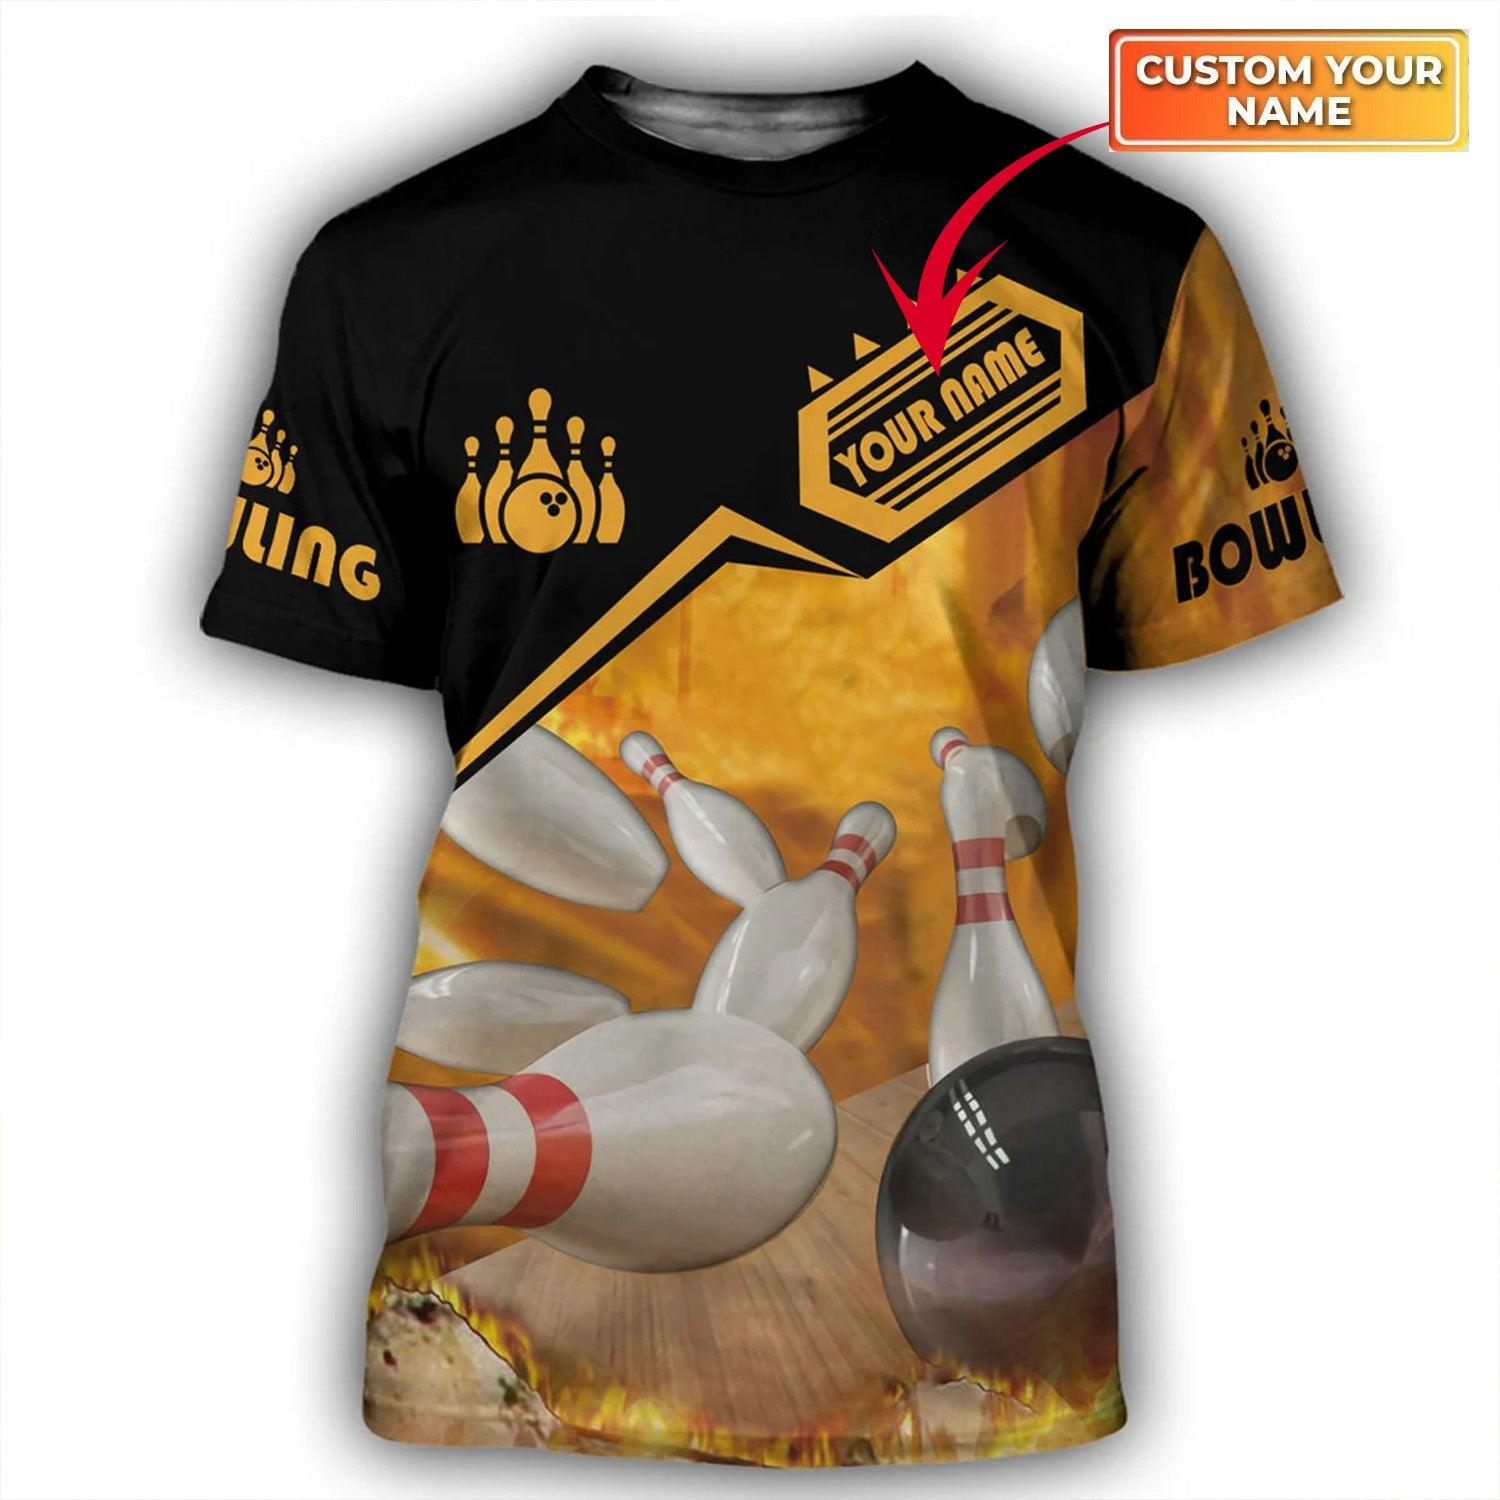 Customized Name Yellow Fire Bowling T Shirt, Personalized Bowling Shirt For Men - Perfect Gift For Bowling Lovers, Bowling Team - Amzanimalsgift